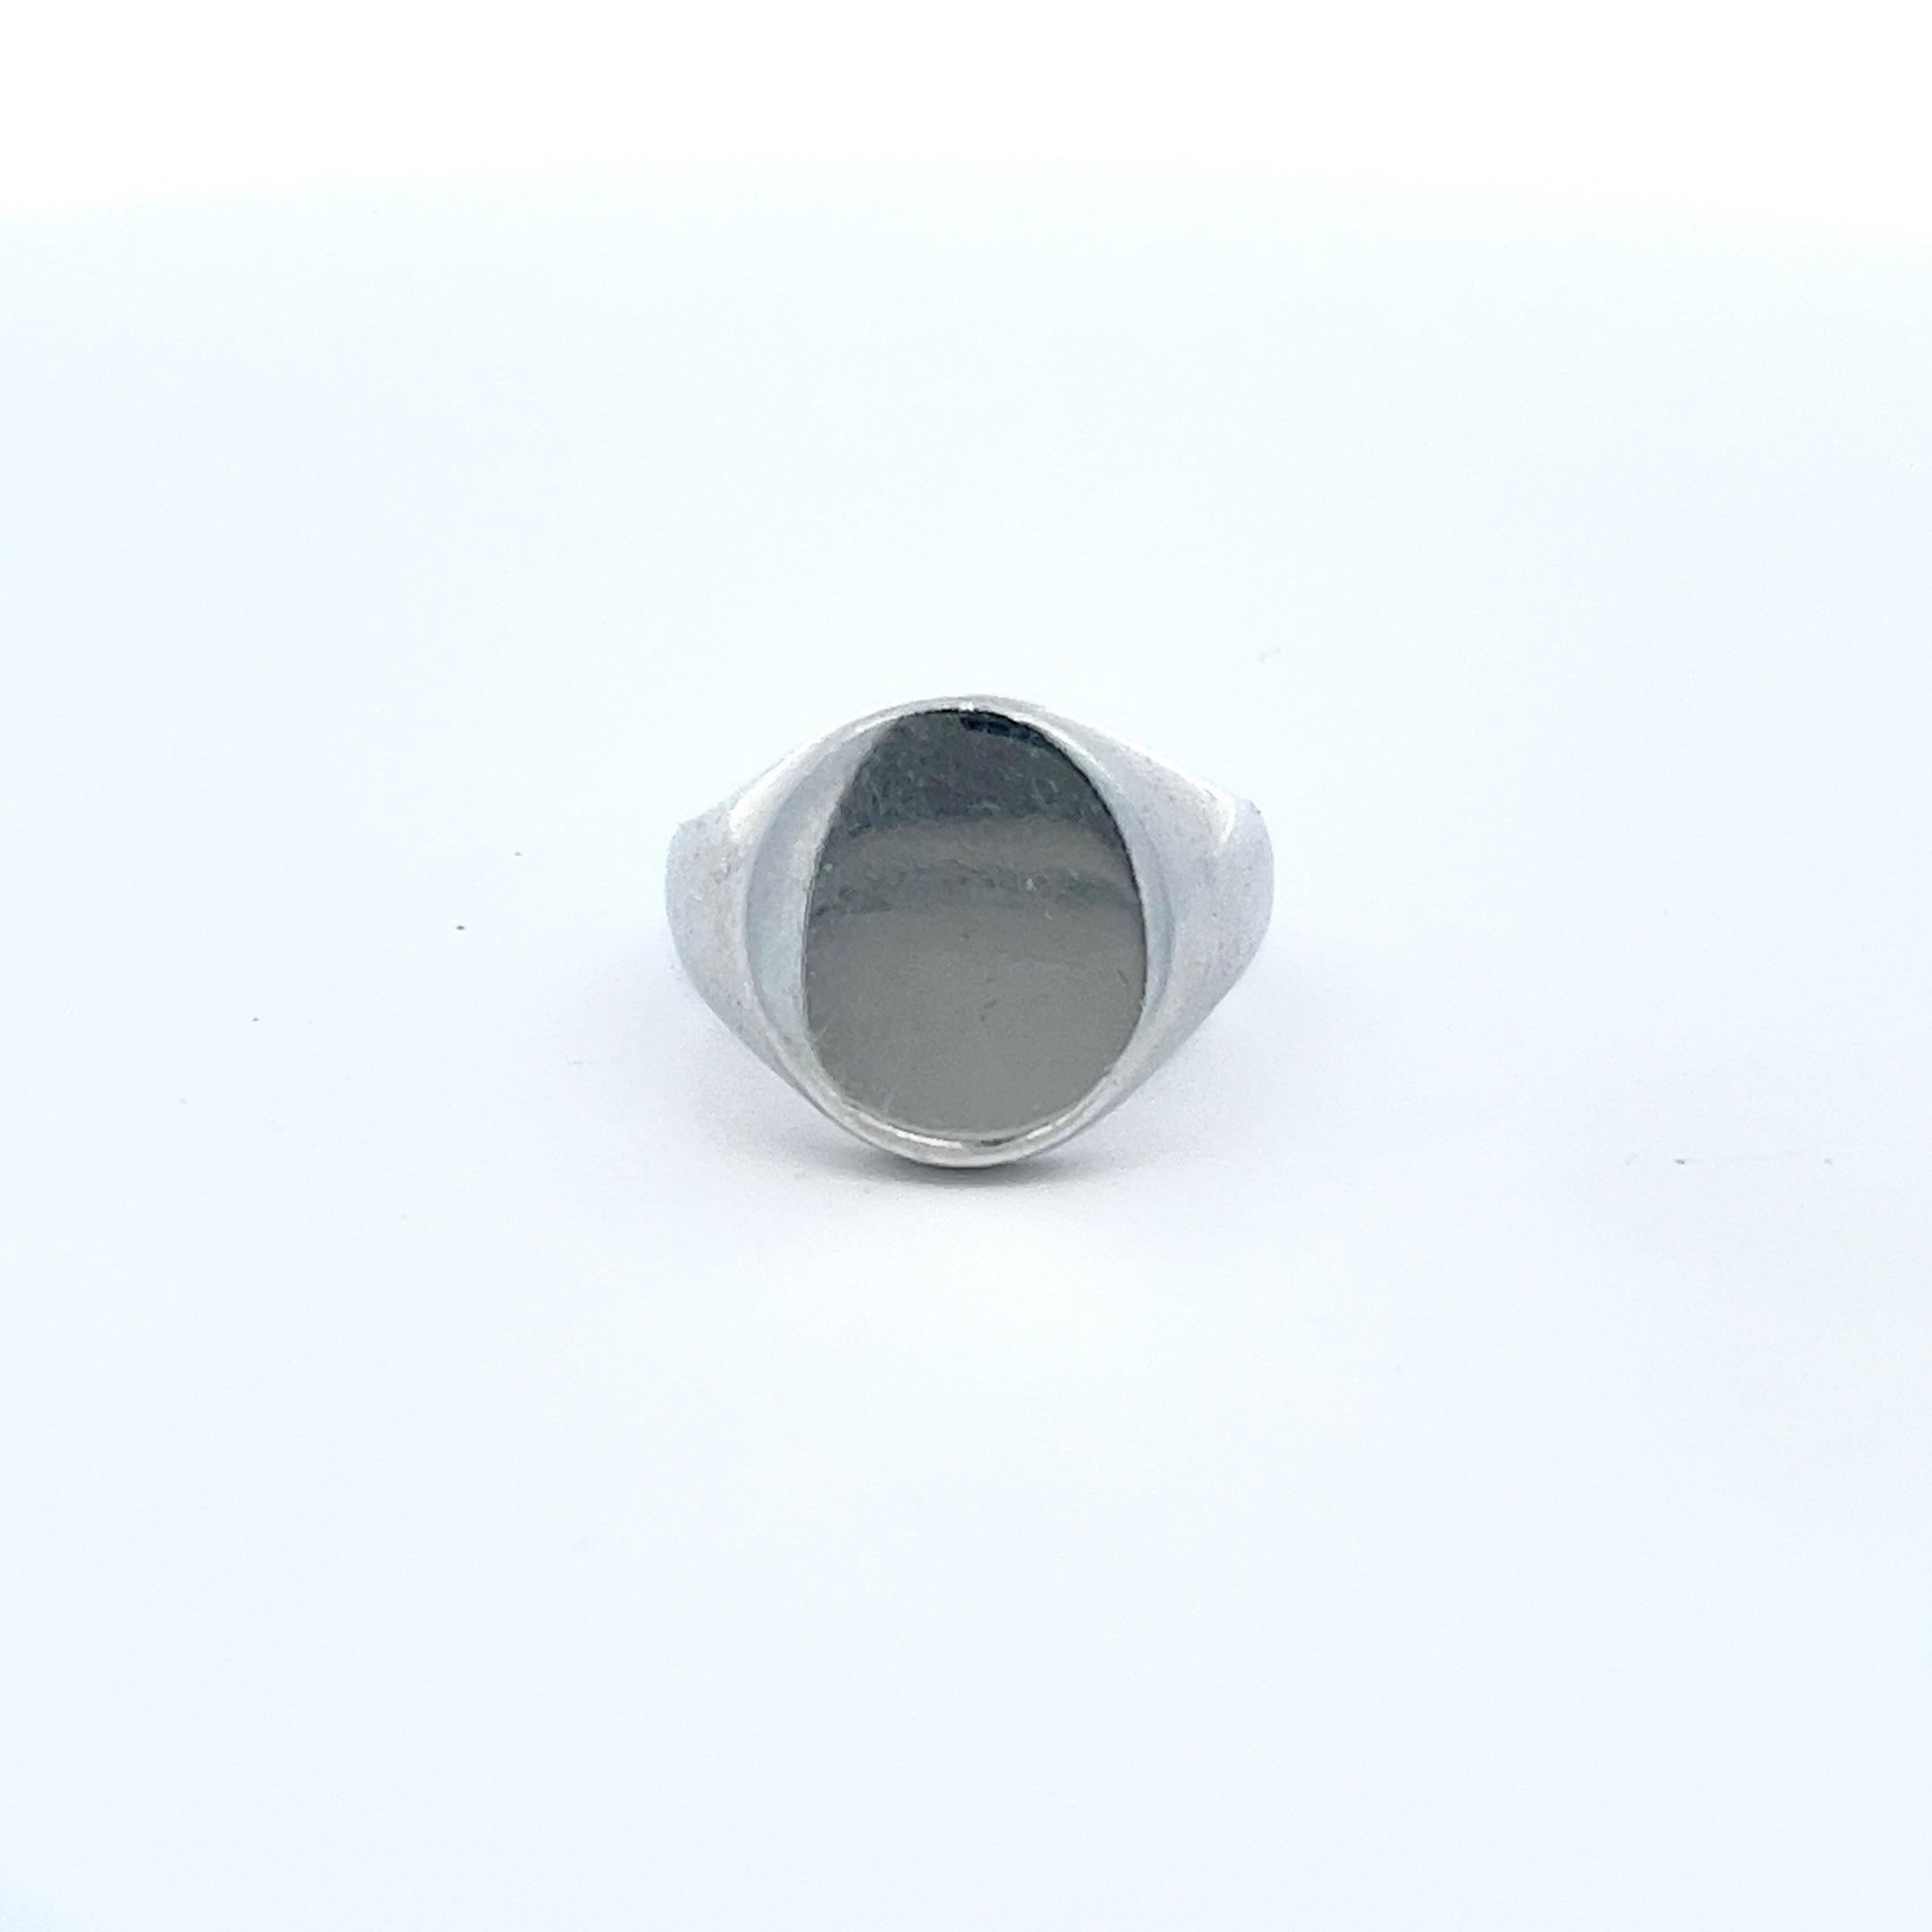 Post-War Rare Vintage Tiffany & Co. Unembellished Signet Ring in Sterling Silver, 925